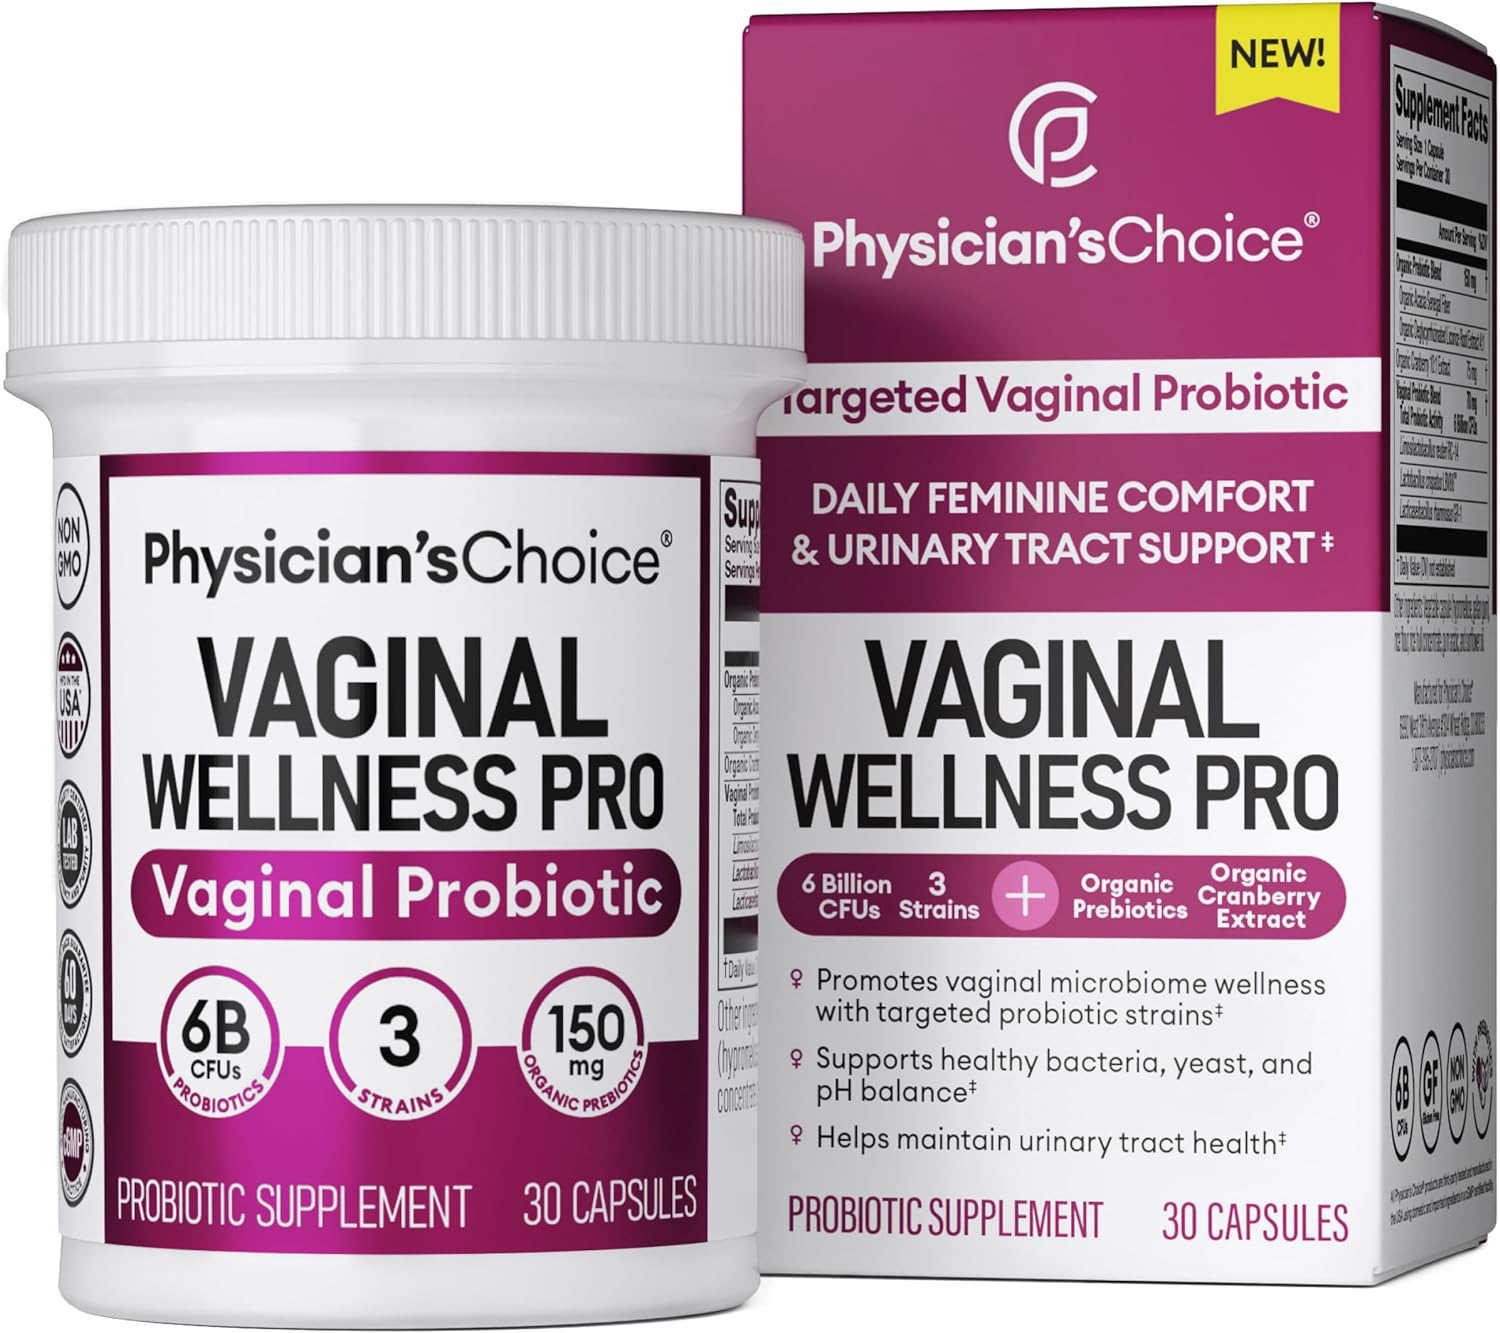 Physician's Choice Women's Wellness Probiotic - pH Balance, Odor Control, Microbiome & Flora Support